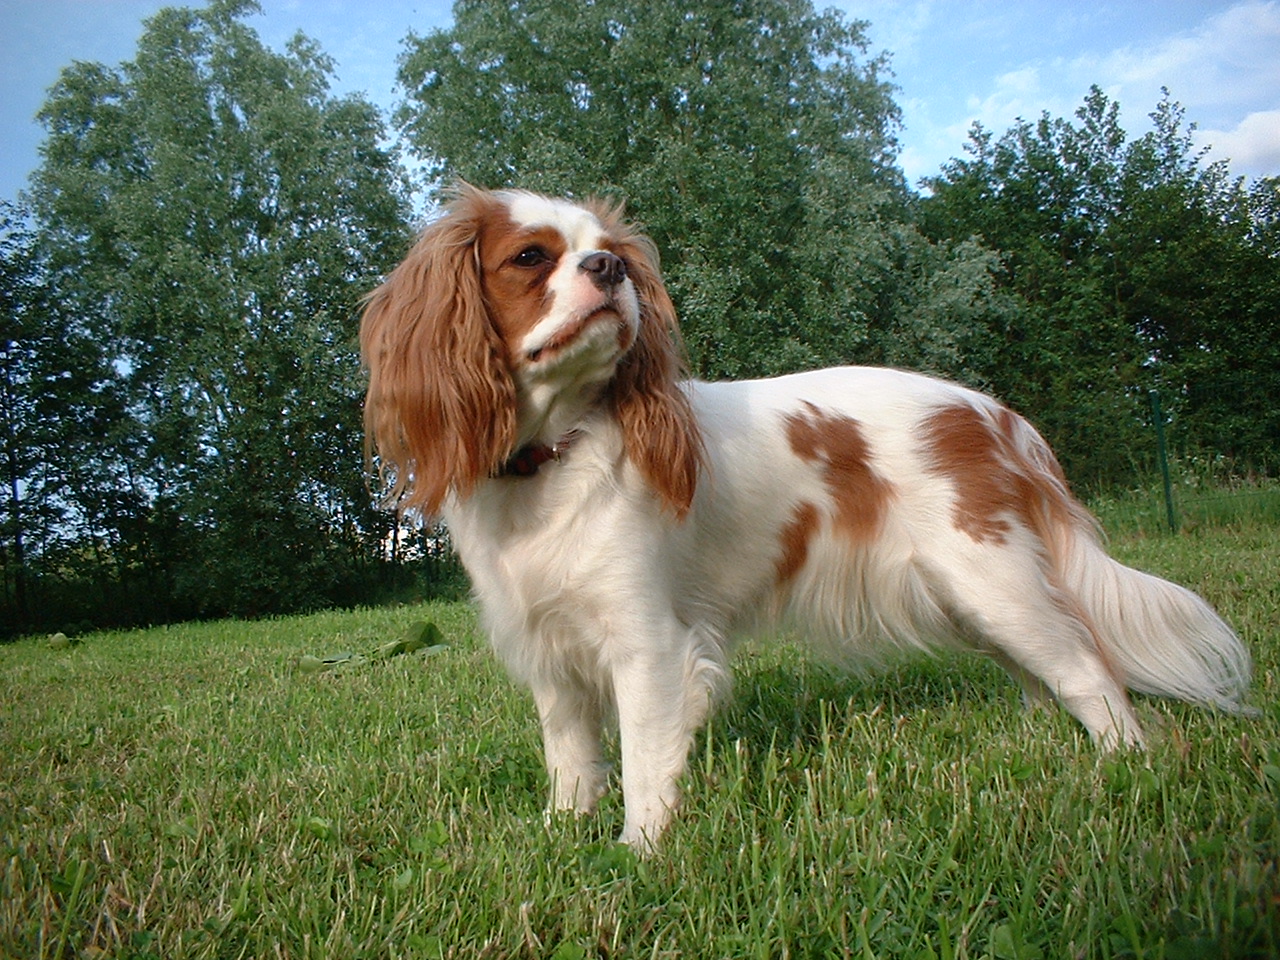 Cavalier King Charles Spaniel The Life of Animals